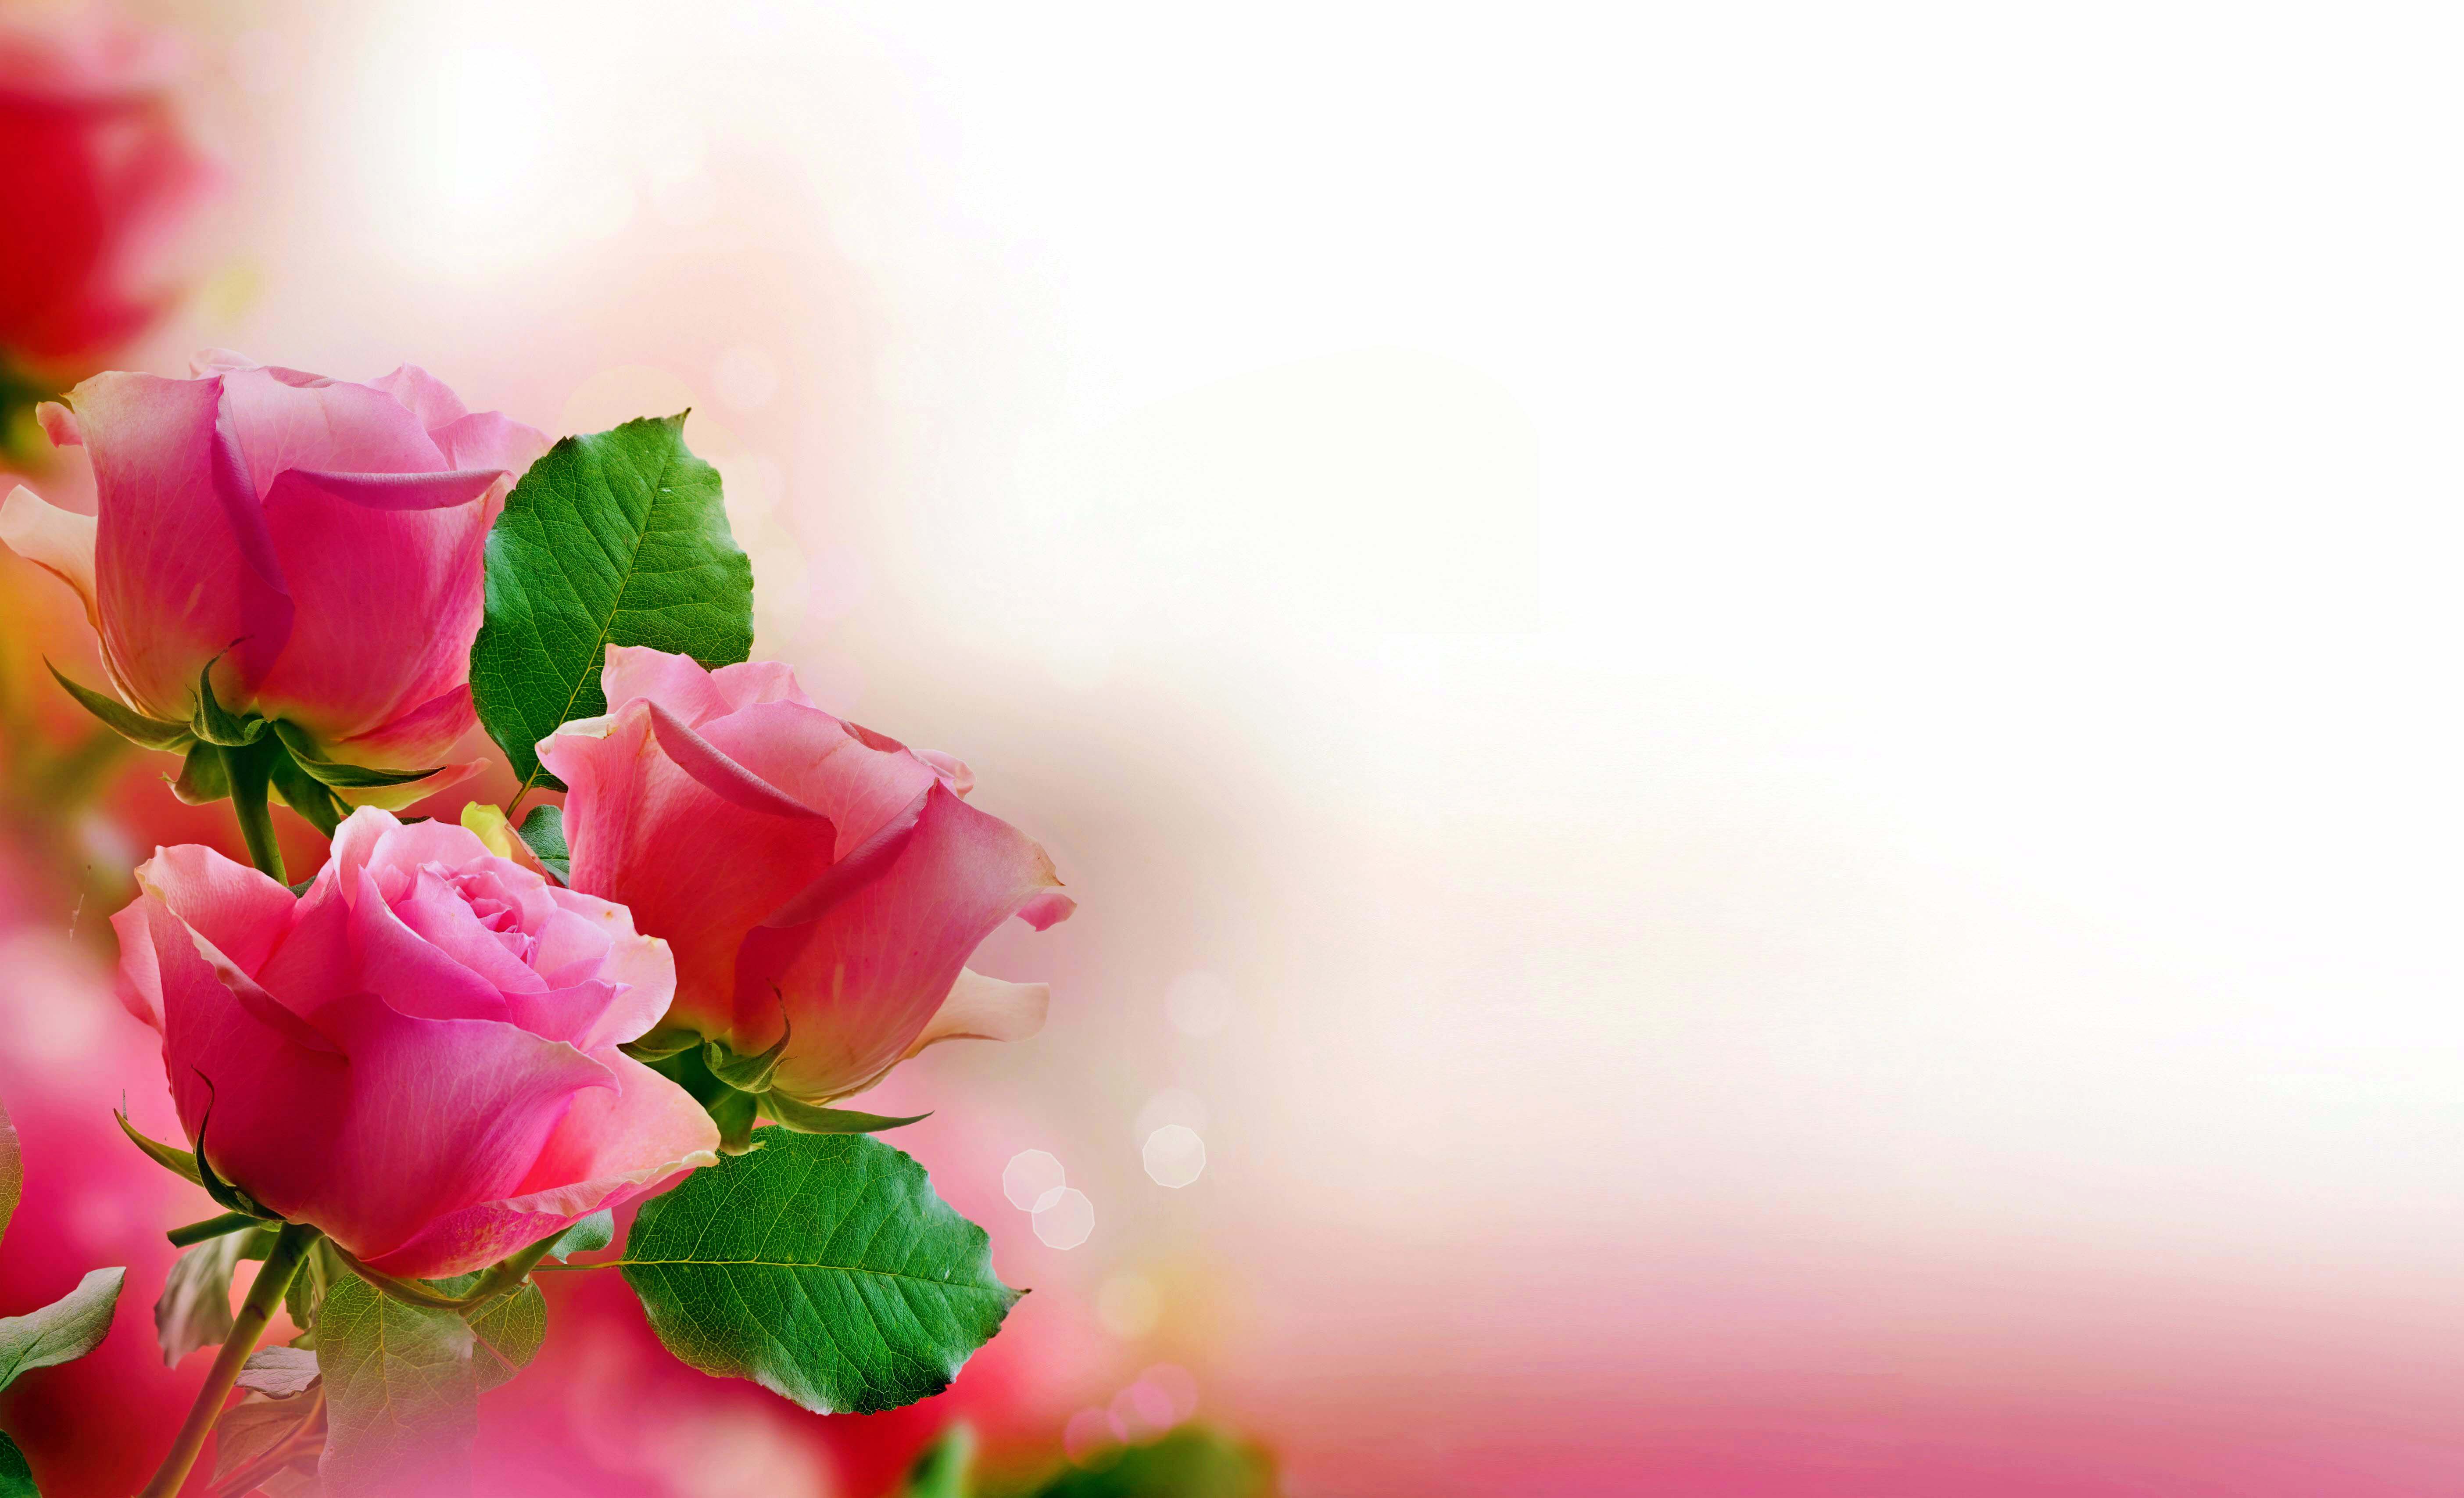 Pink Roses Pretty Wallpapers Images HD   MoreWallpaperscom